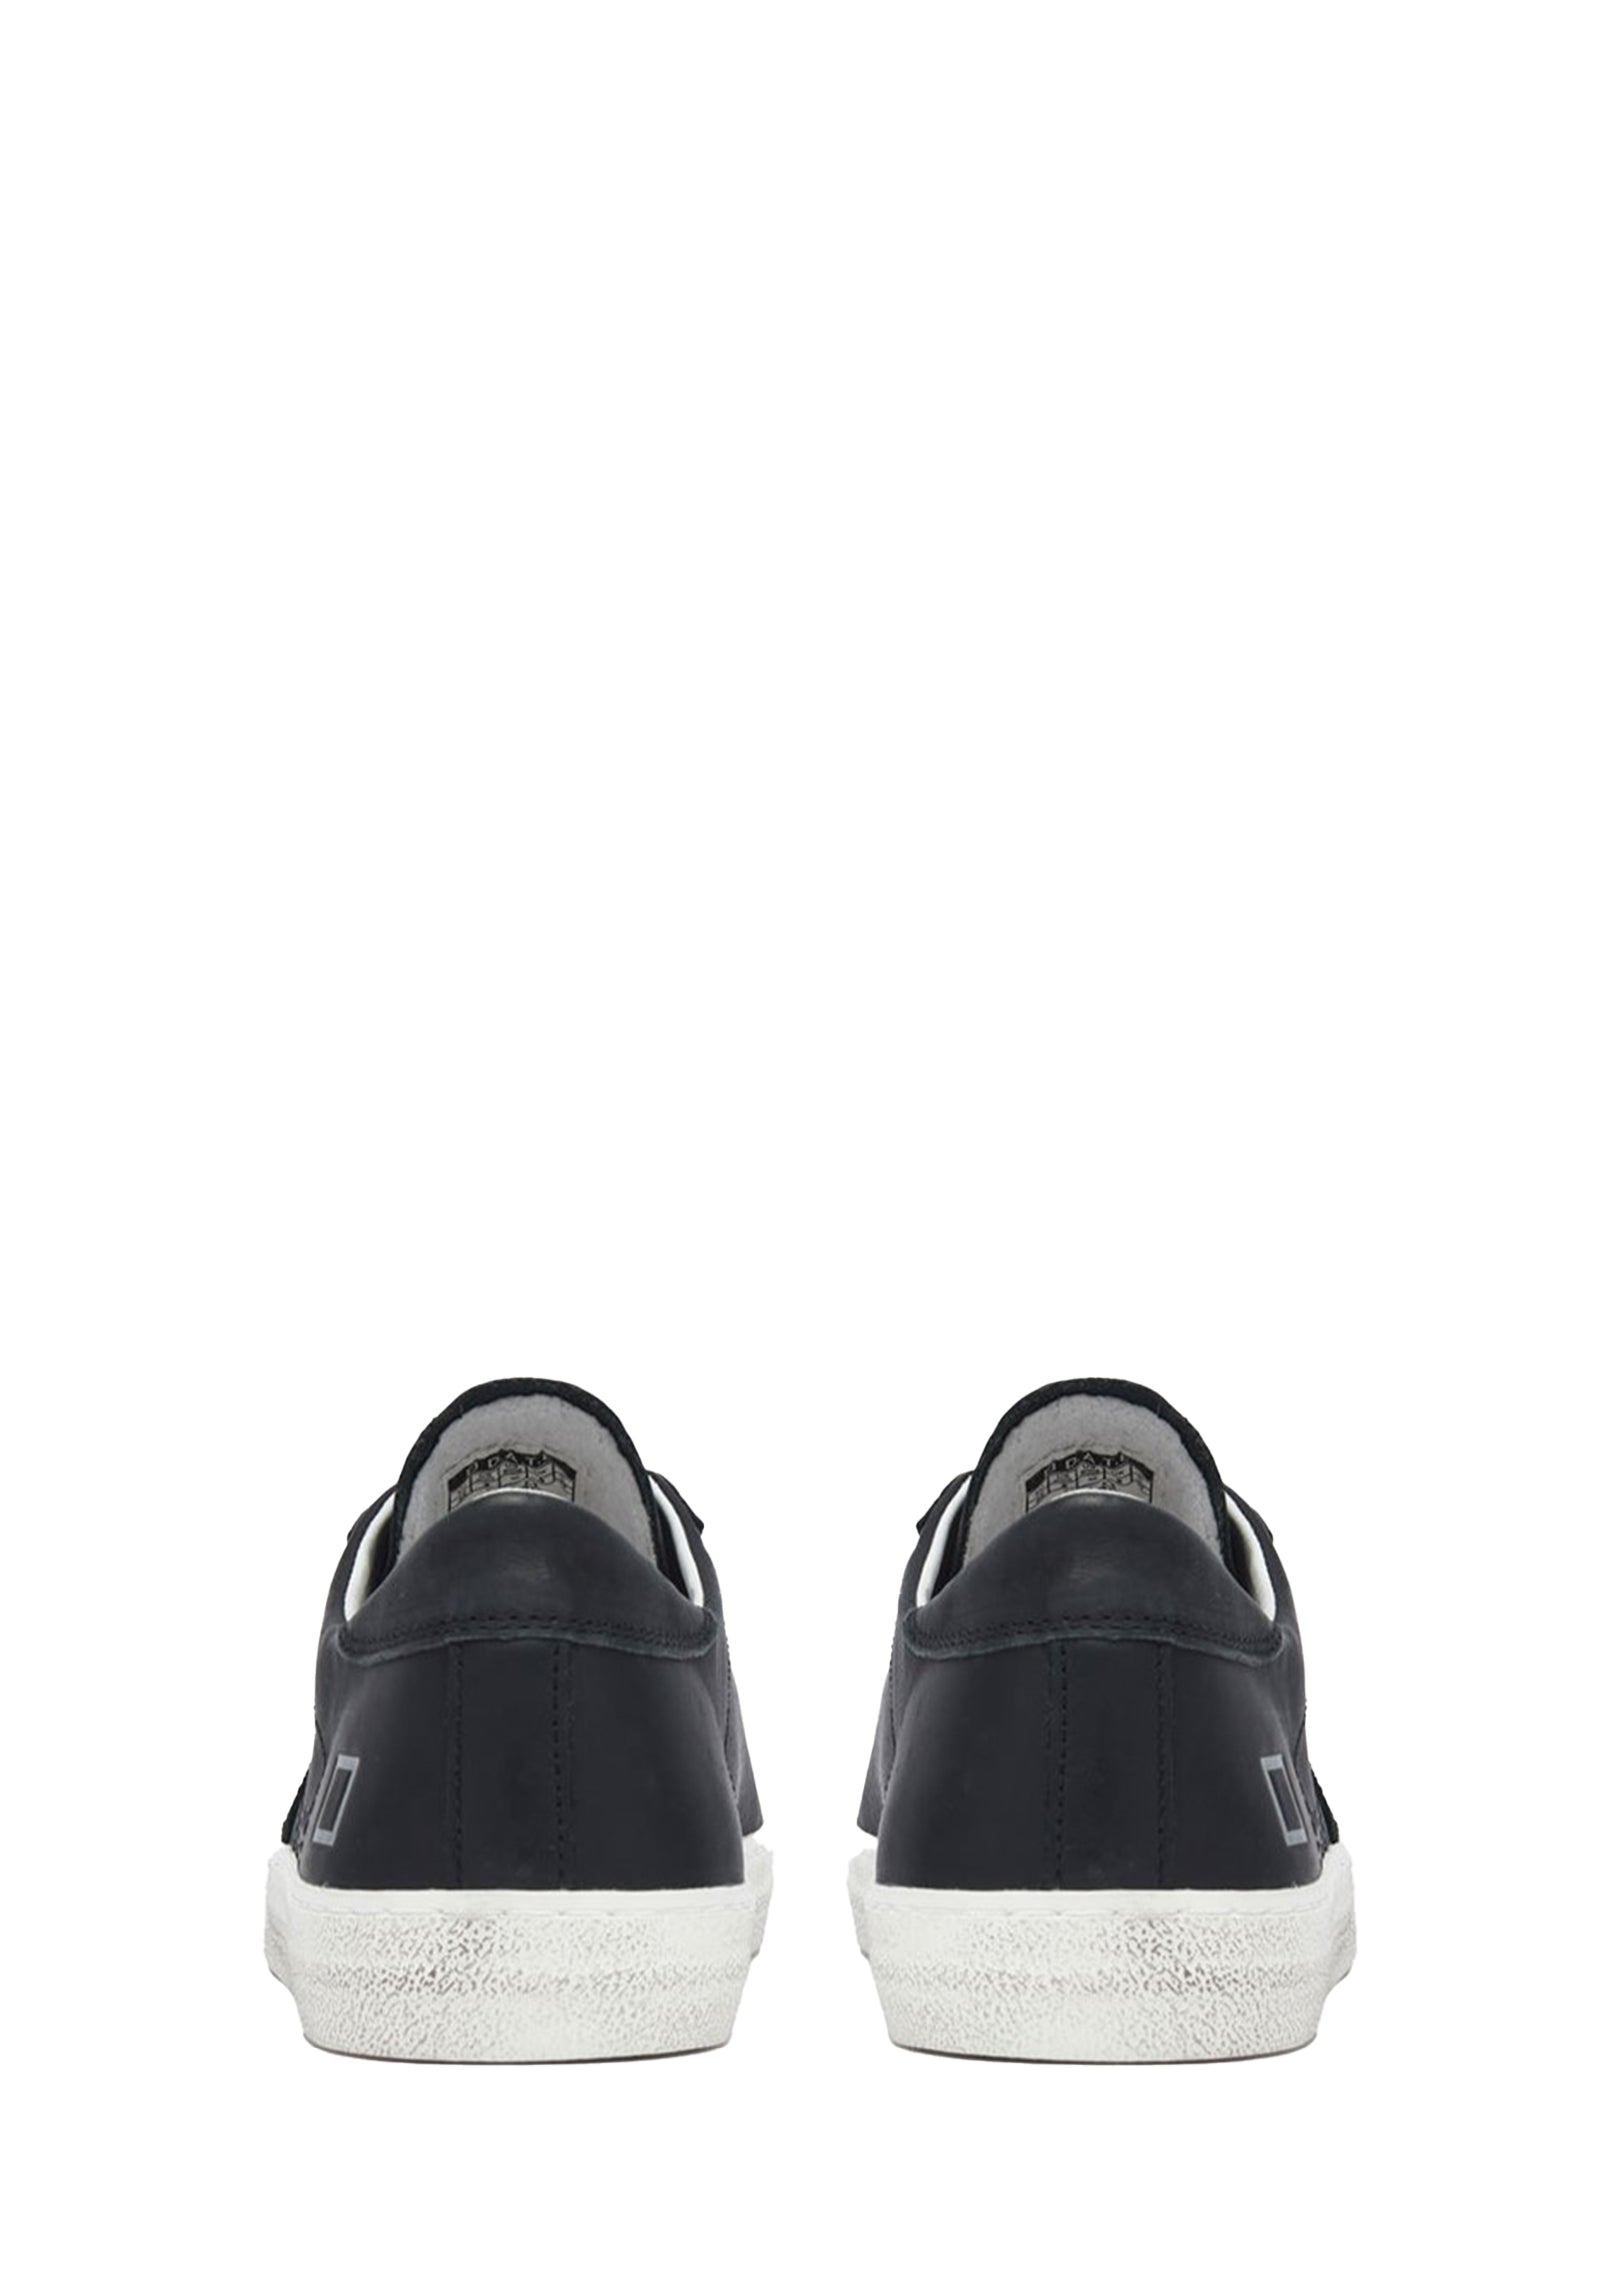 Sneakers Hill Low Wintage Calf Black